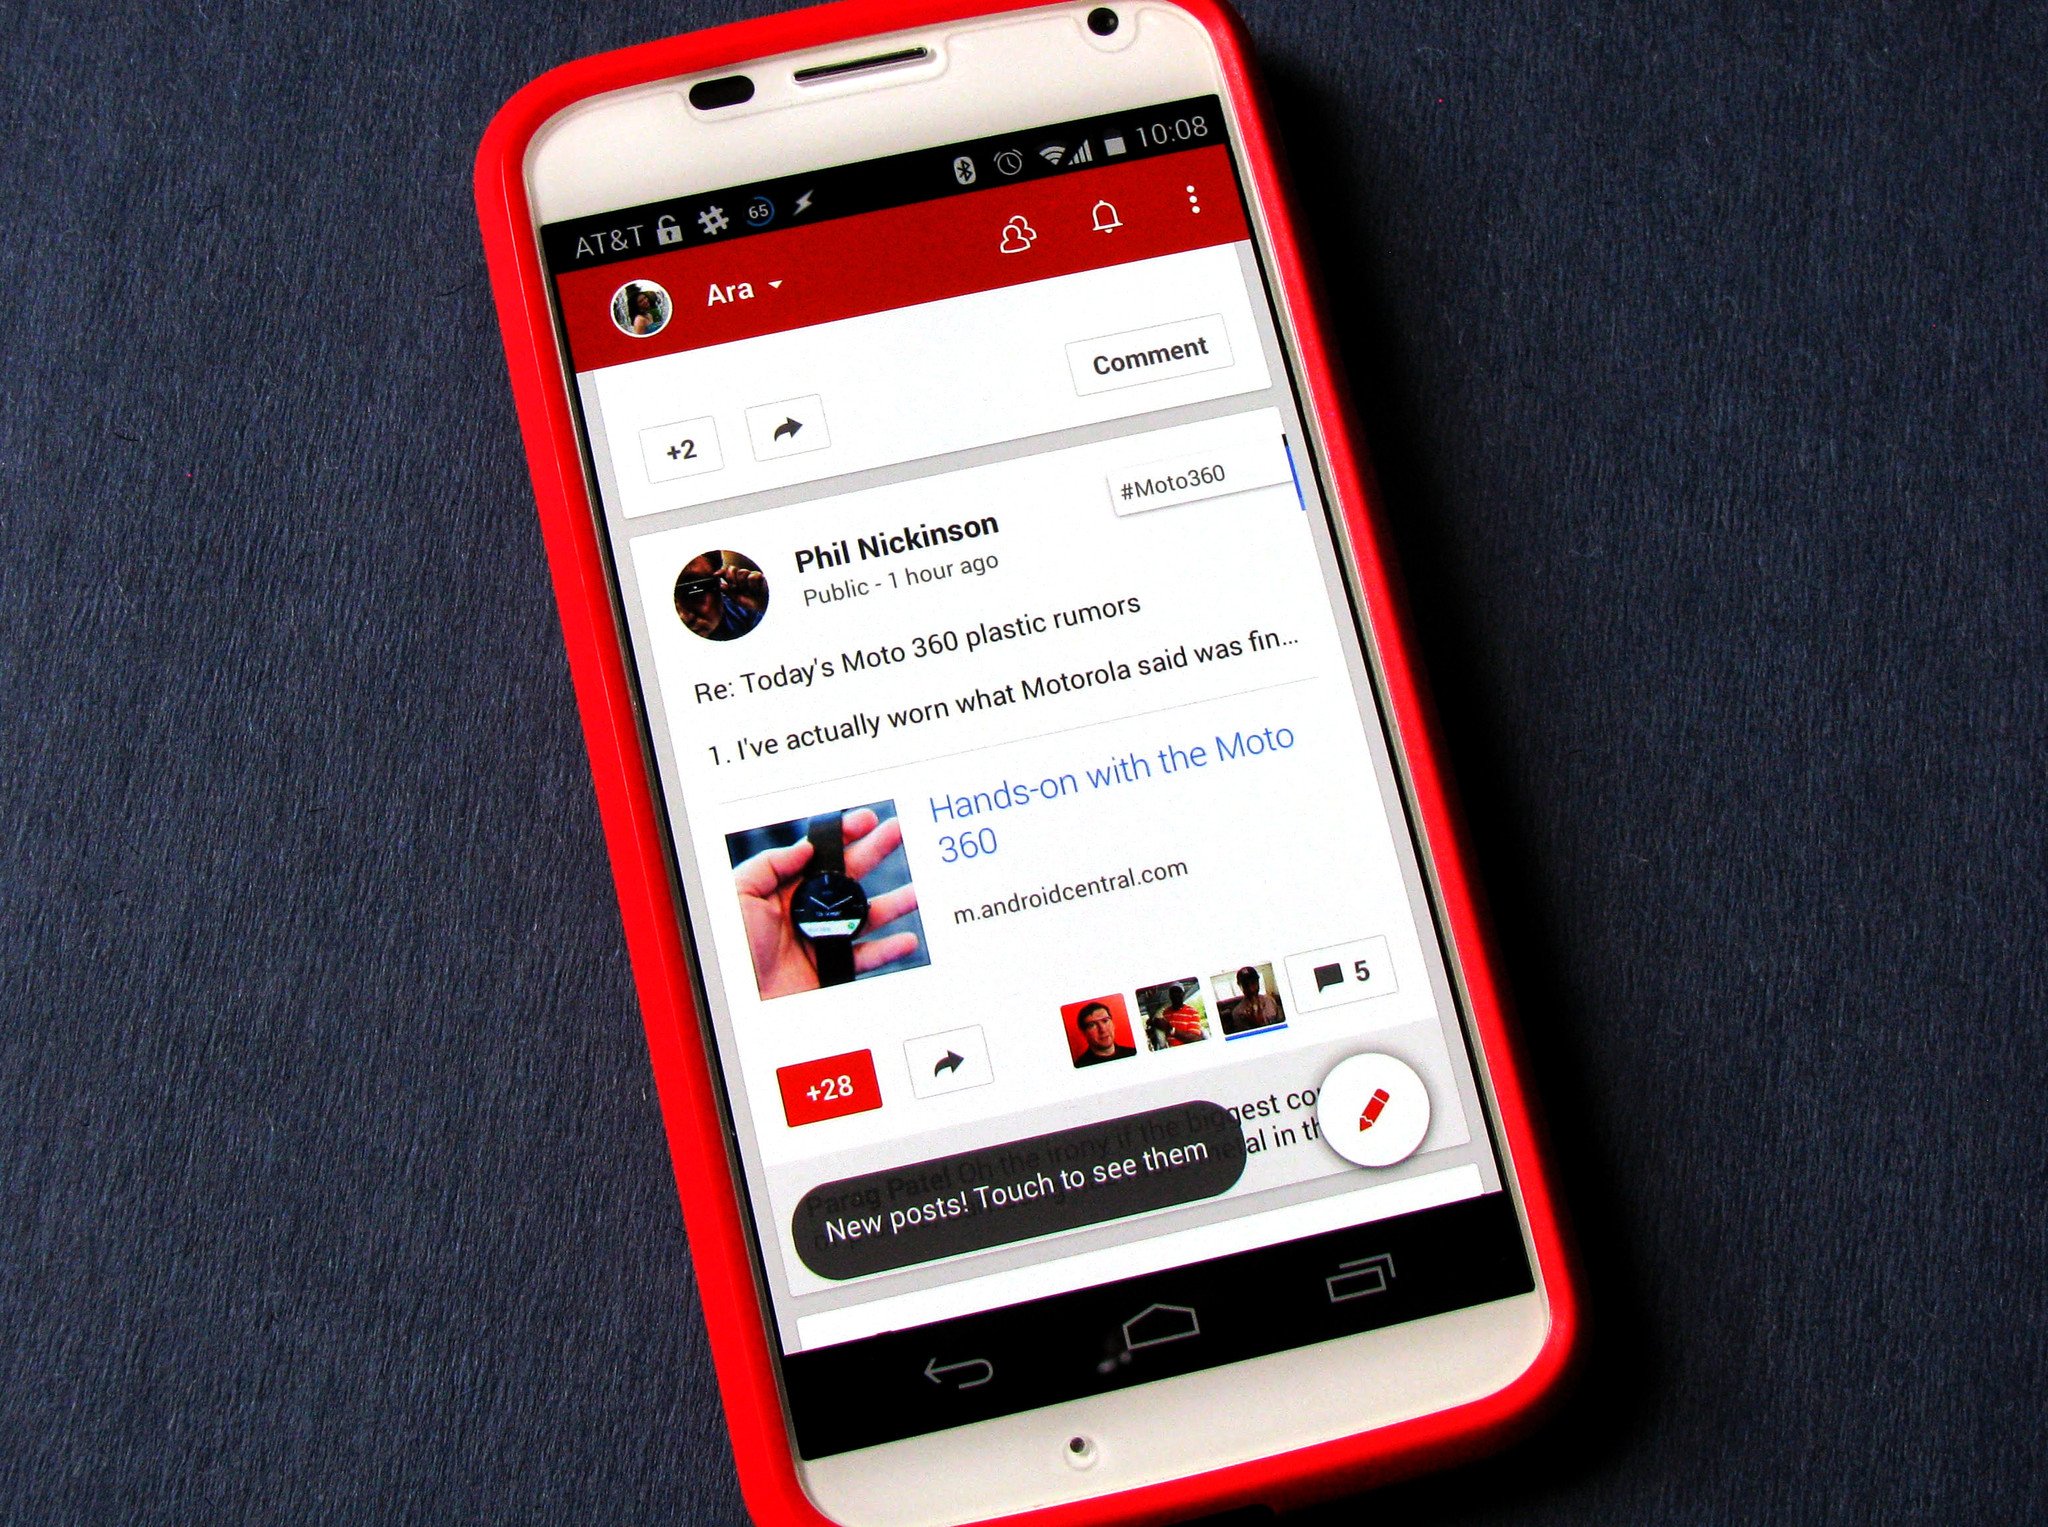 Google+ App Available for Android - Android Community